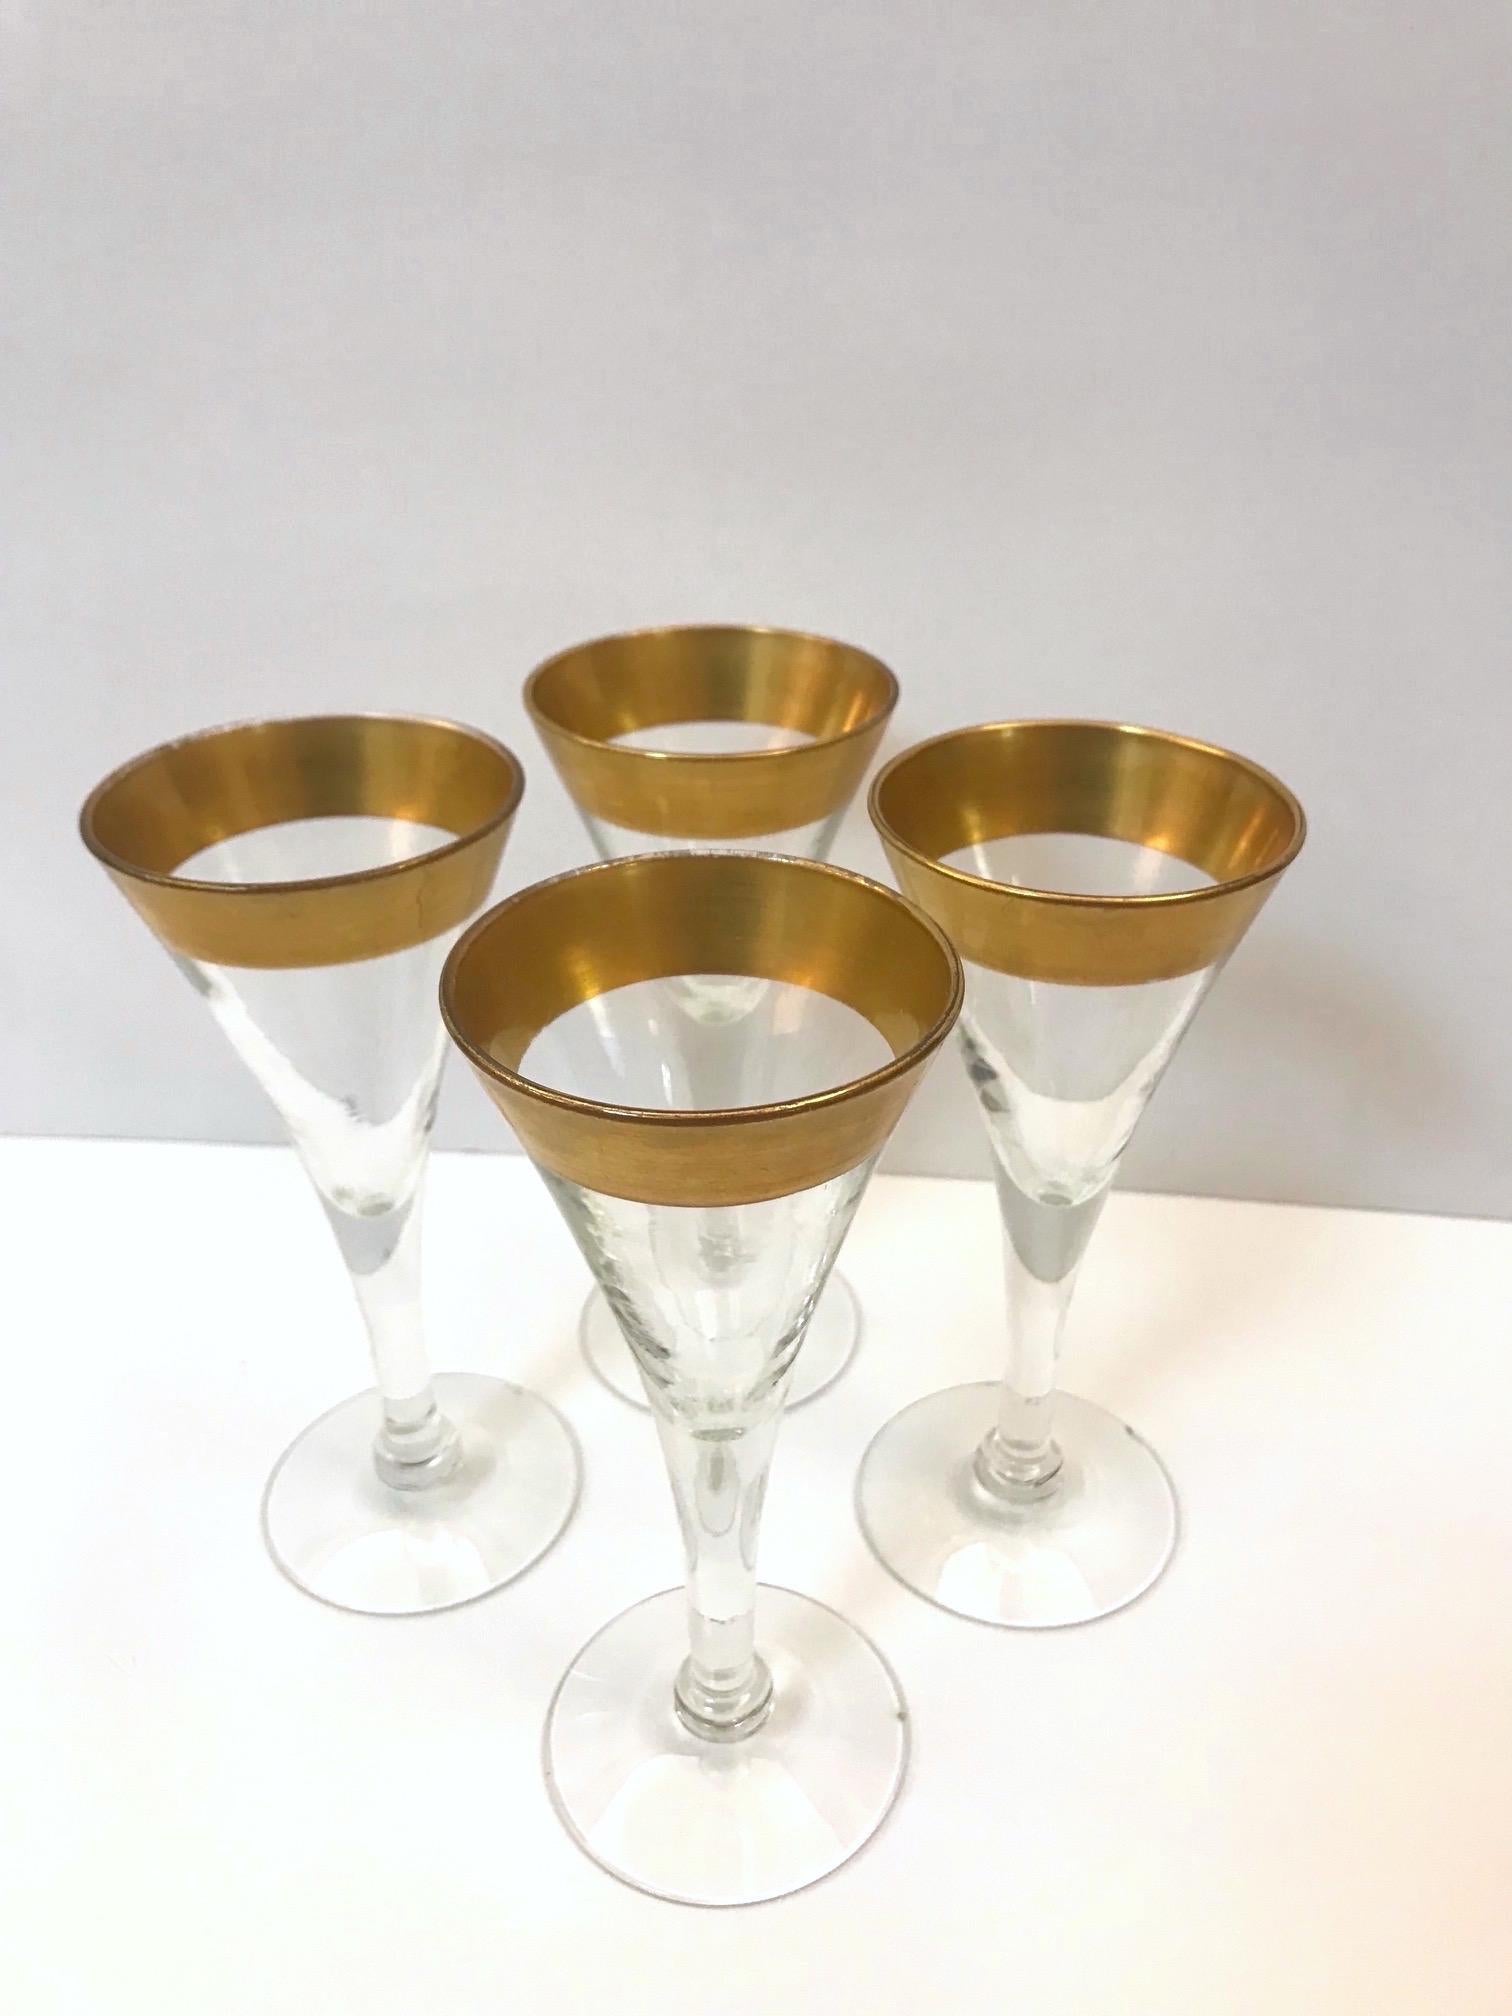 American Set of Six Crystal Gold Rim Cordial Glasses by Dorothy Thorpe